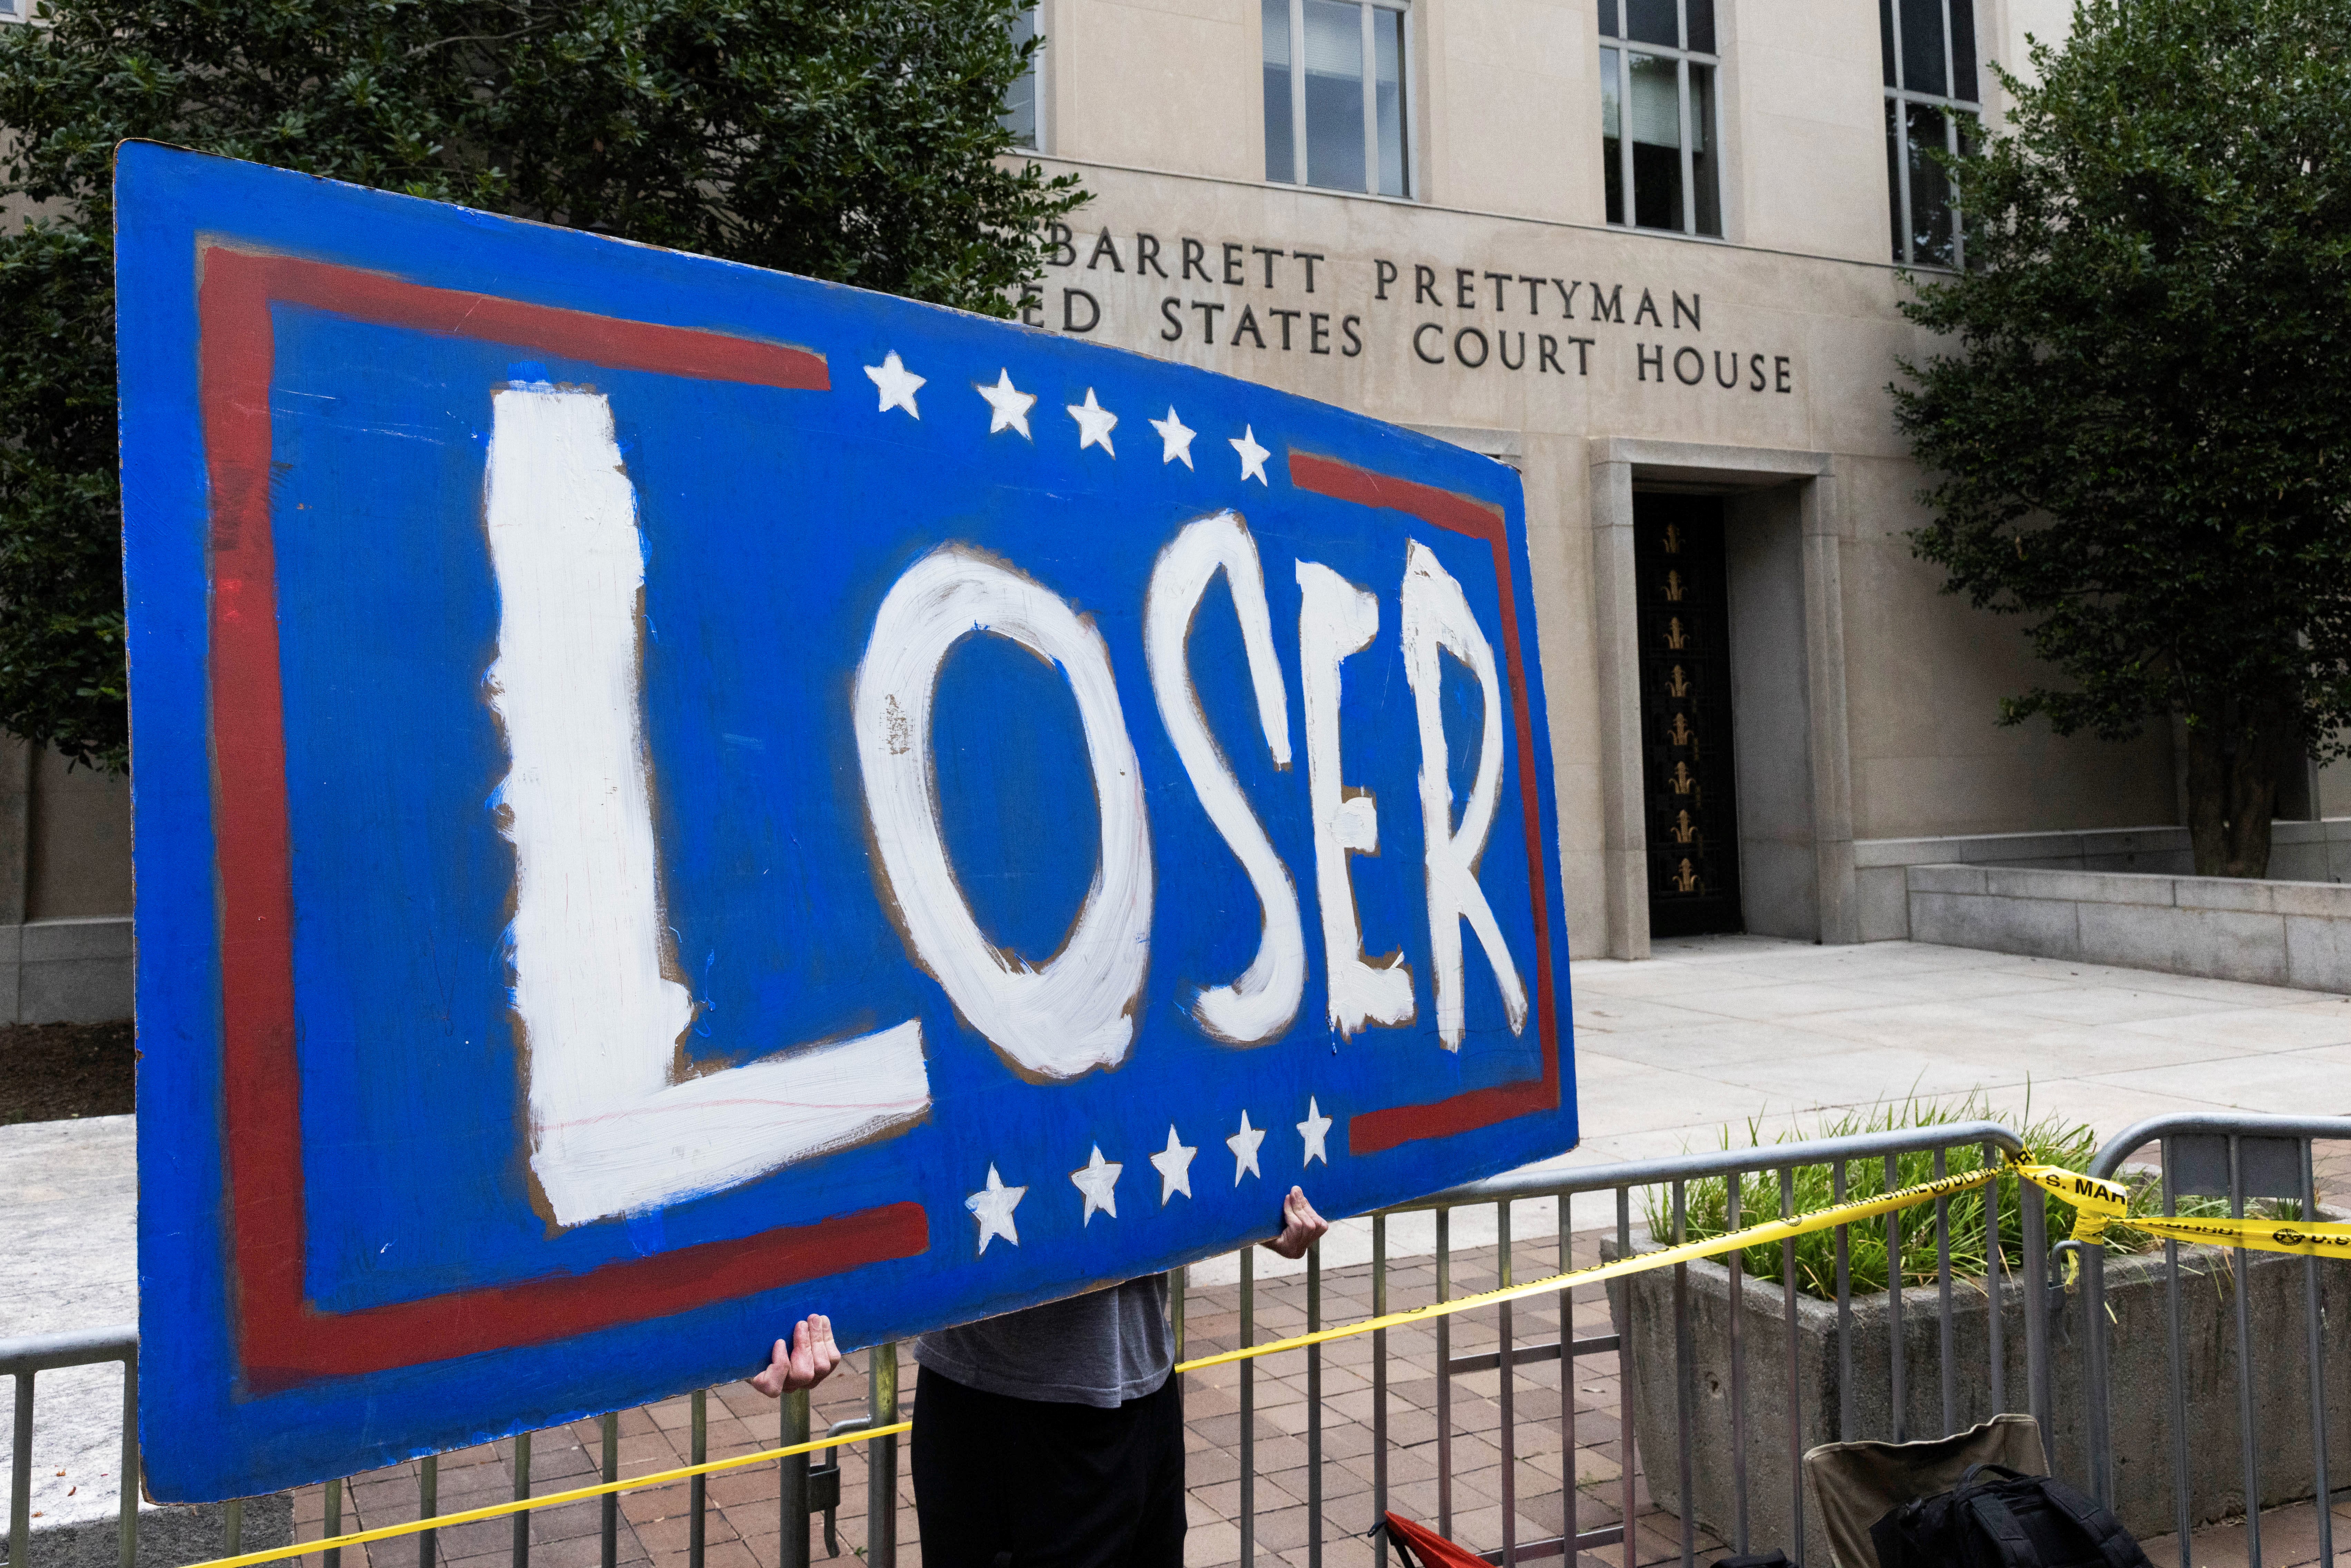 A protester stands with a sign outside E. Barrett Prettyman United States Court House, in Washington D.C., the United States, Aug. 3, 2023. (Aaron Schwartz/Xinhua via Getty Images)